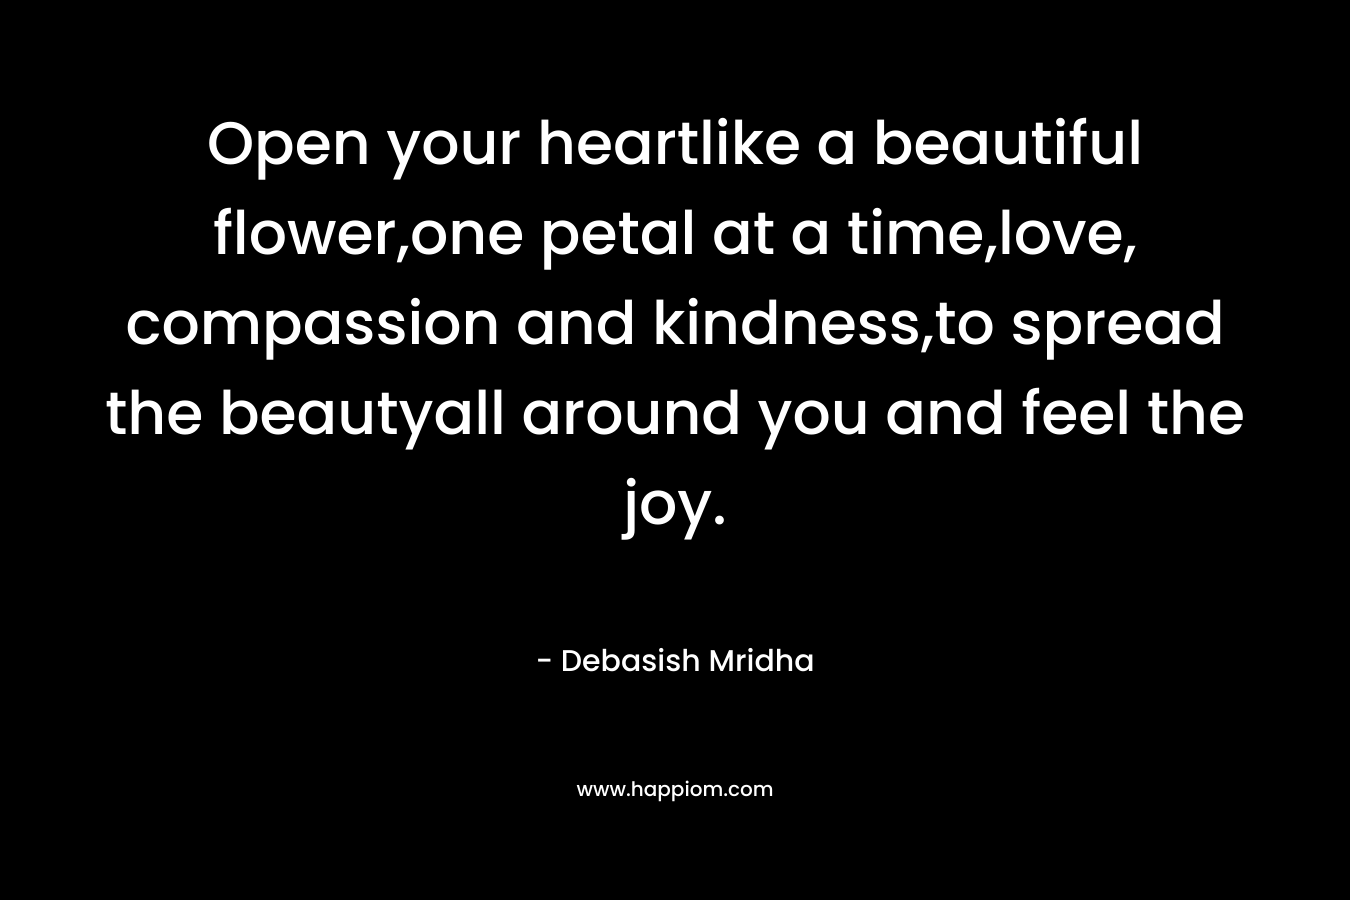 Open your heartlike a beautiful flower,one petal at a time,love, compassion and kindness,to spread the beautyall around you and feel the joy. – Debasish Mridha